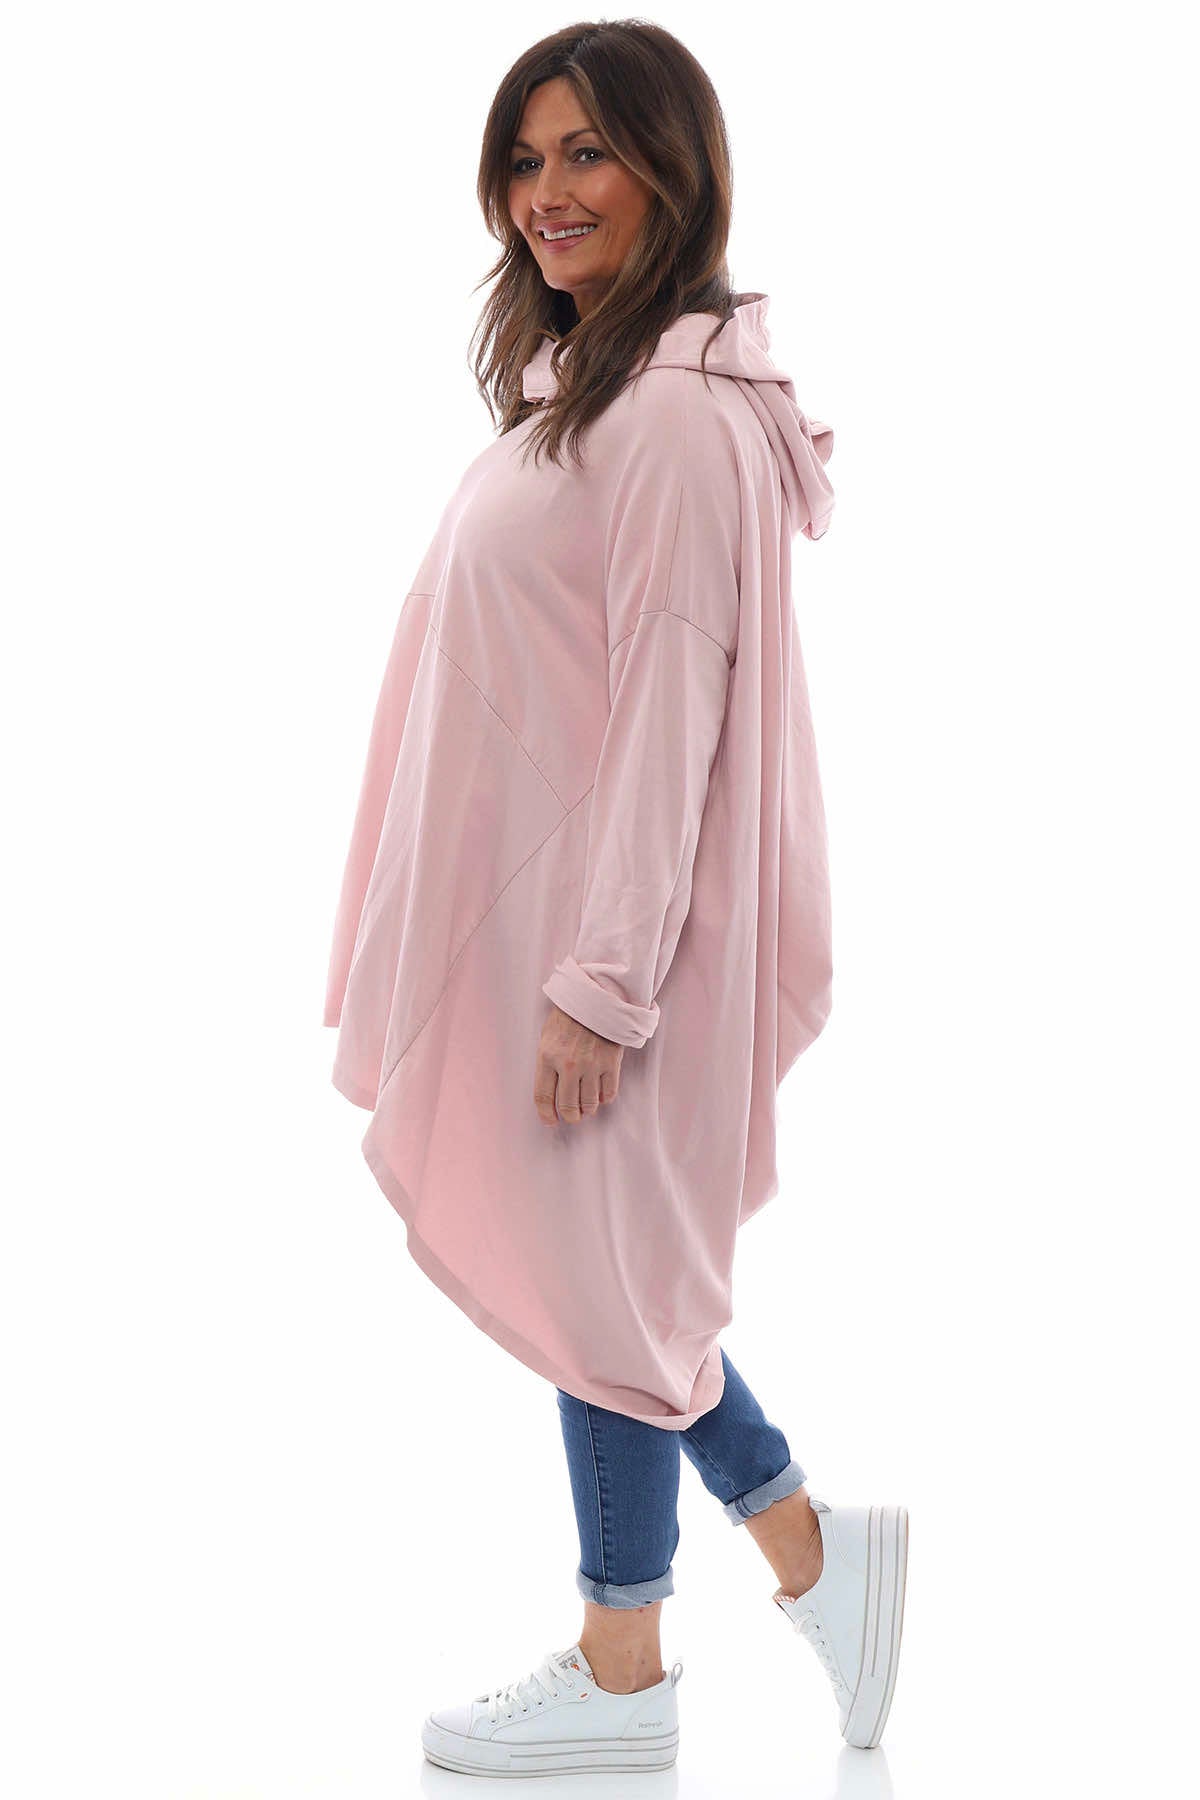 Lorena Cowl Hooded Cotton Top Pink